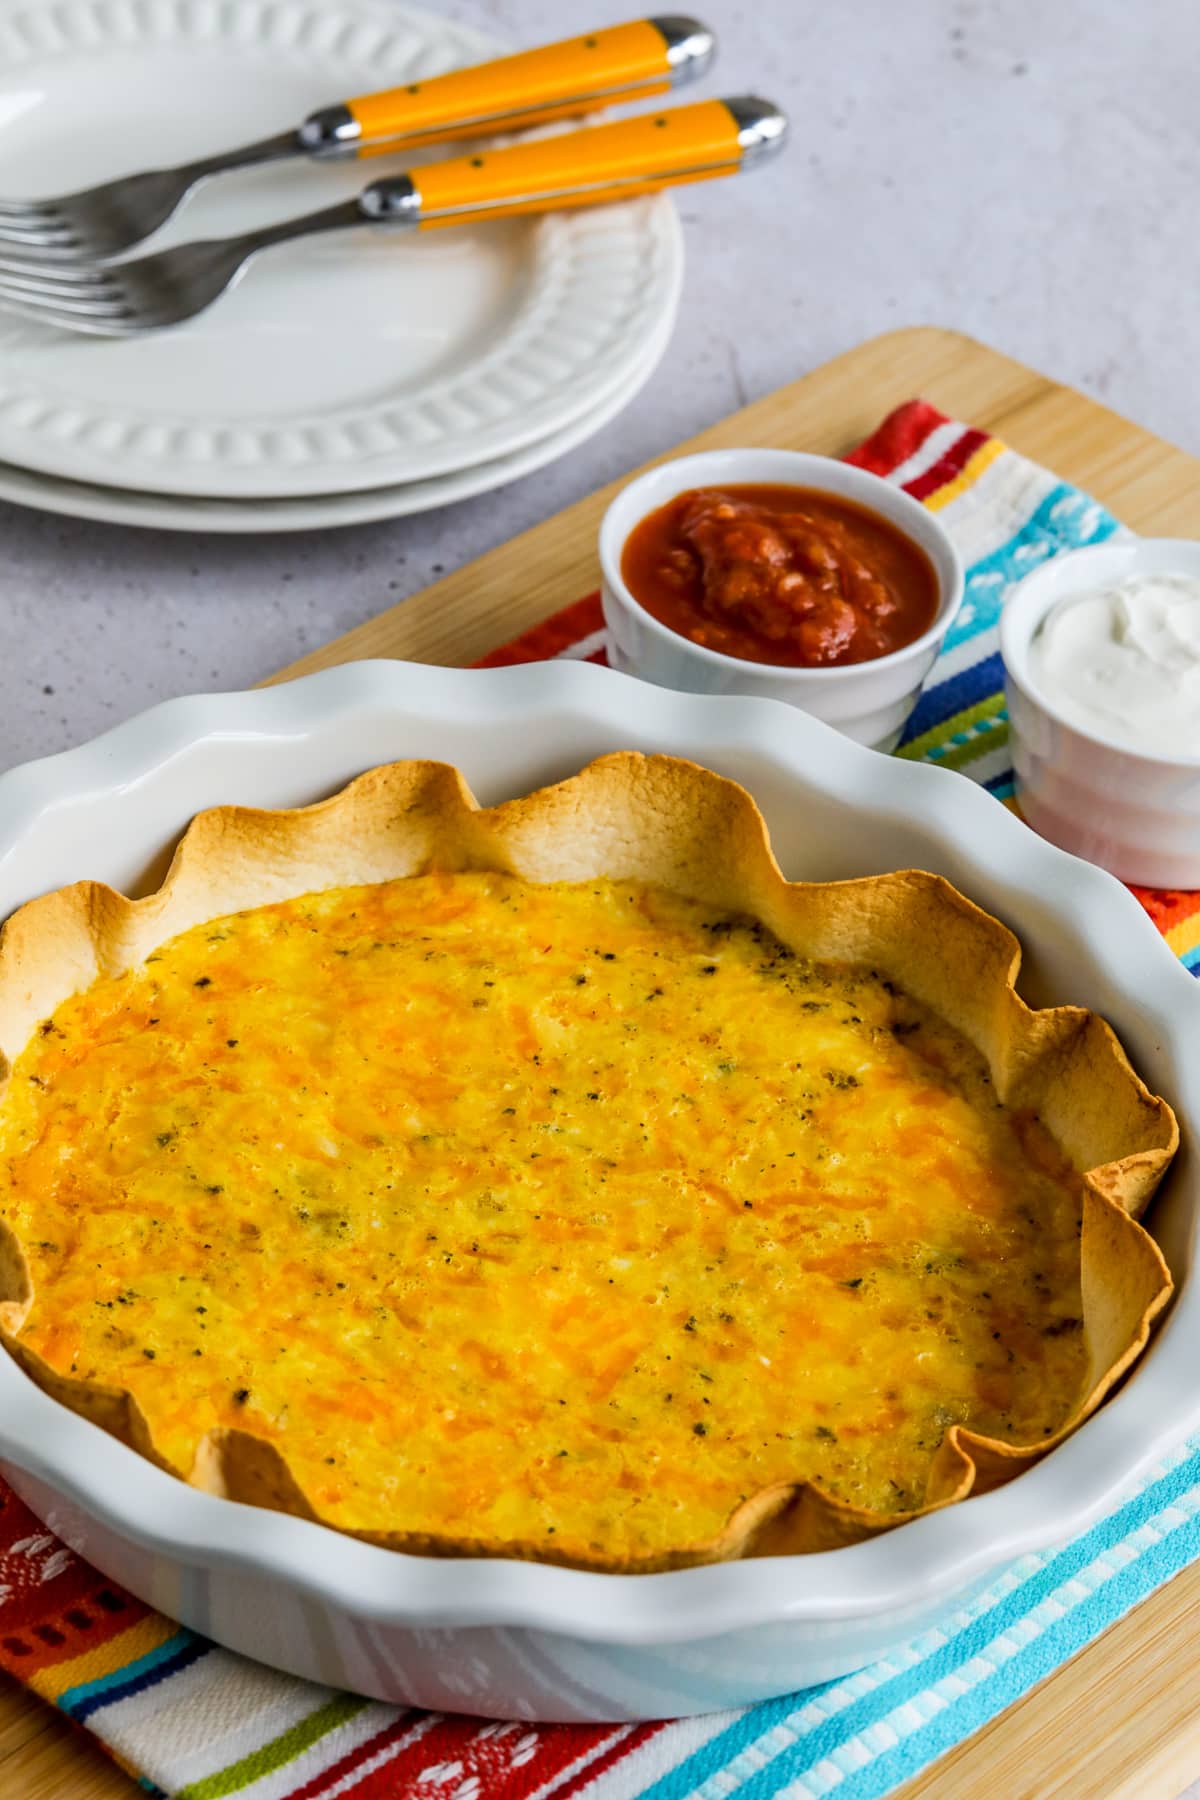 Egg and Cheese Tortilla Bake shown in white pie dish with sour cream and salsa on the side and plates/forks in back.